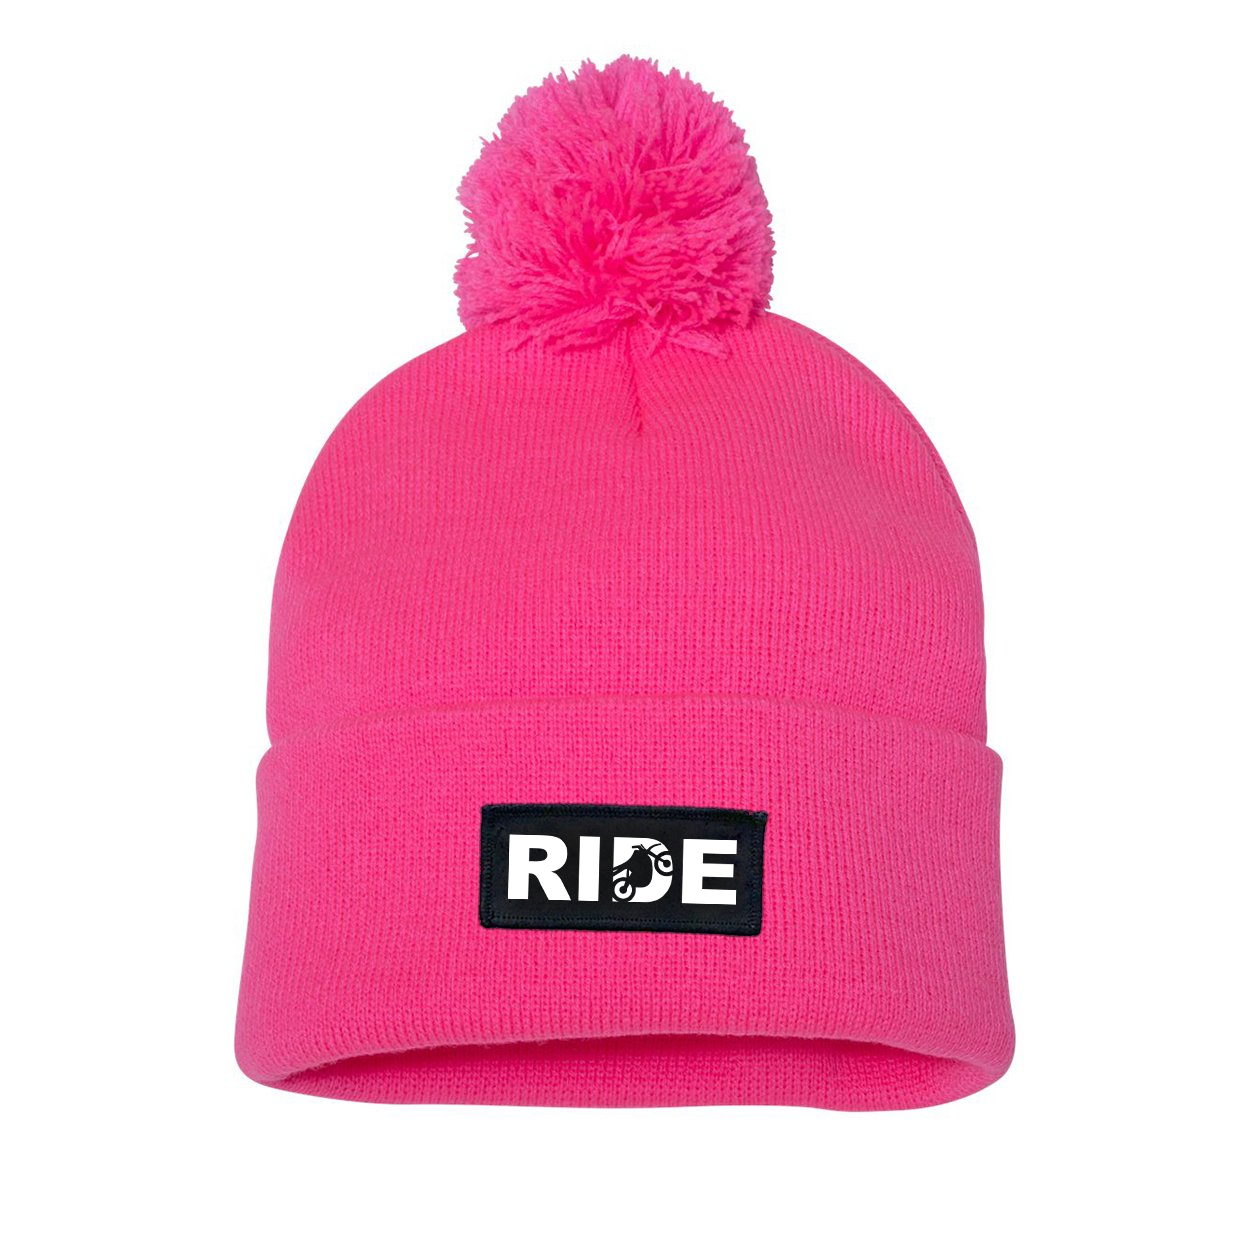 Ride Moto Logo Night Out Woven Patch Roll Up Pom Knit Beanie Pink (White Logo)